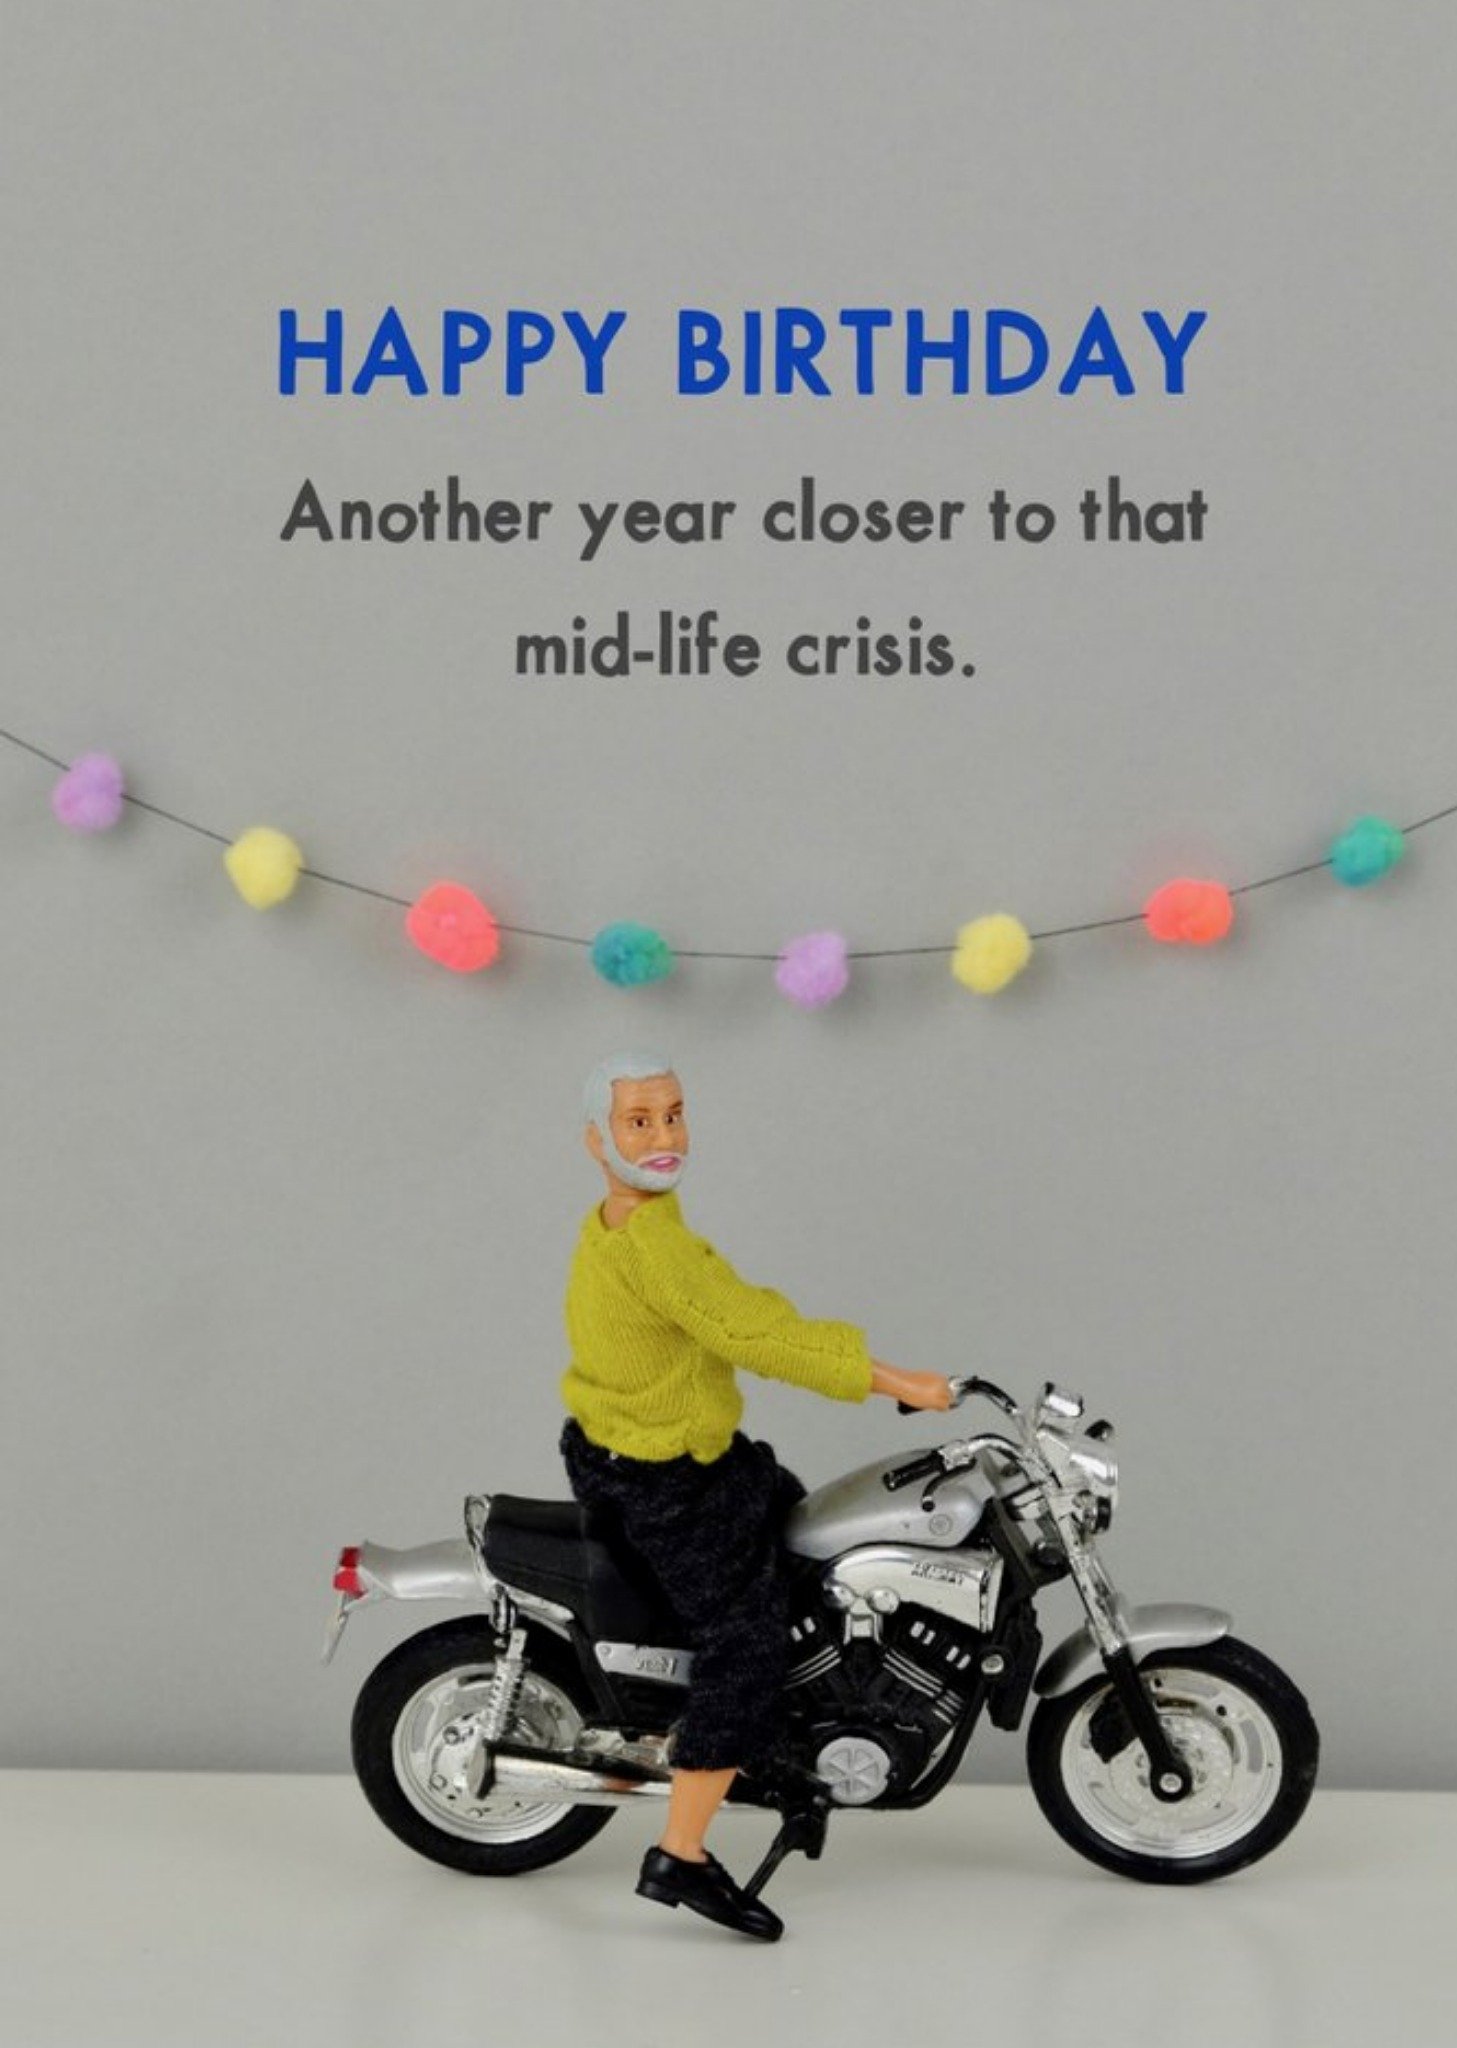 Bold And Bright Funny Dolls Another Year Closer To That Mid-Life Crisis Birthday Card Ecard